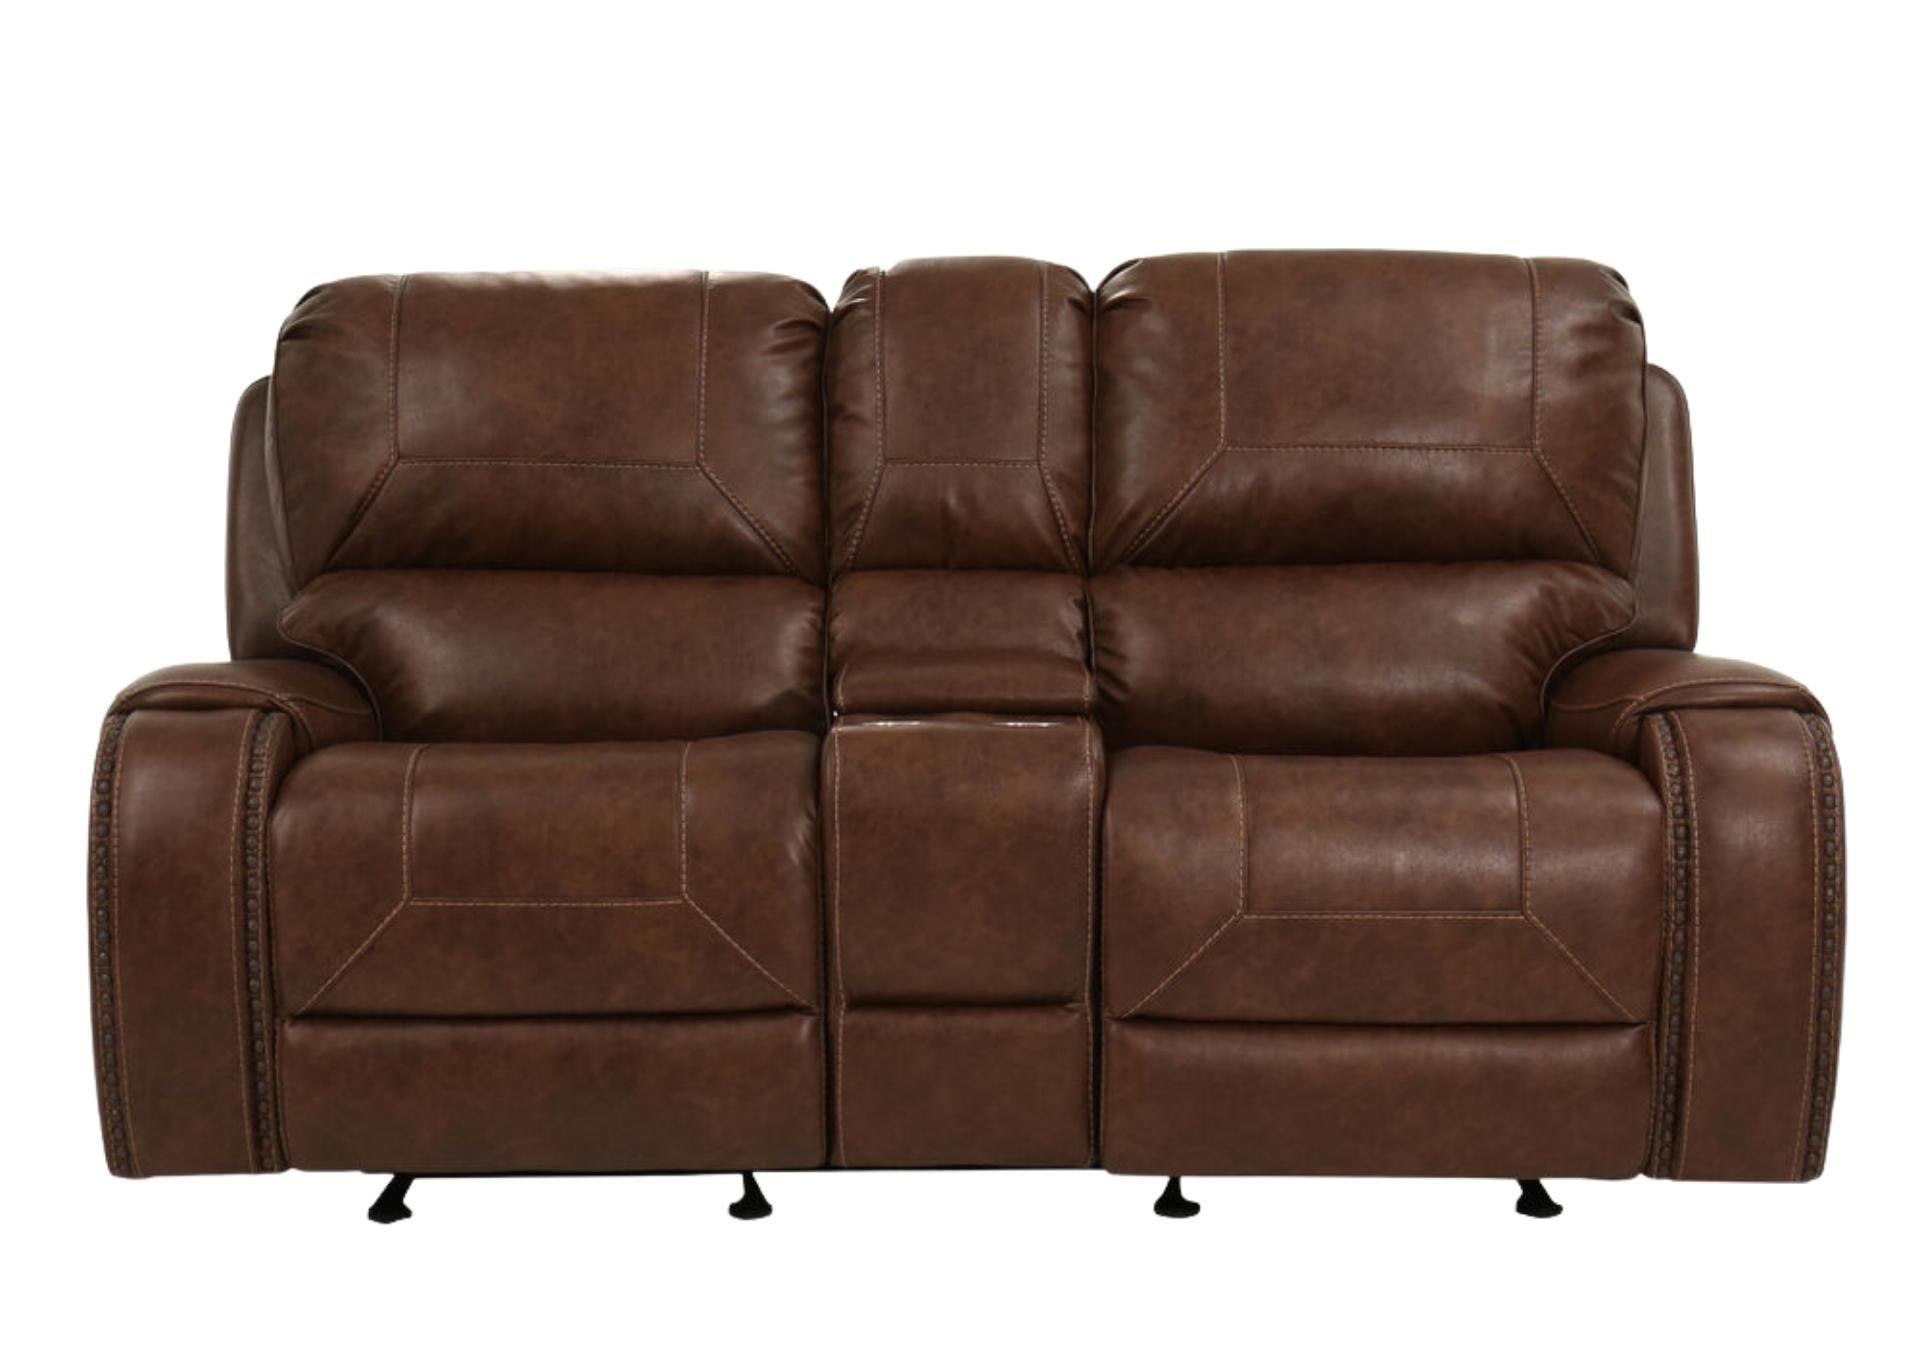 KEILY BROWN RECLINING LOVESEAT WITH CONSOLE,STEVE SILVER COMPANY